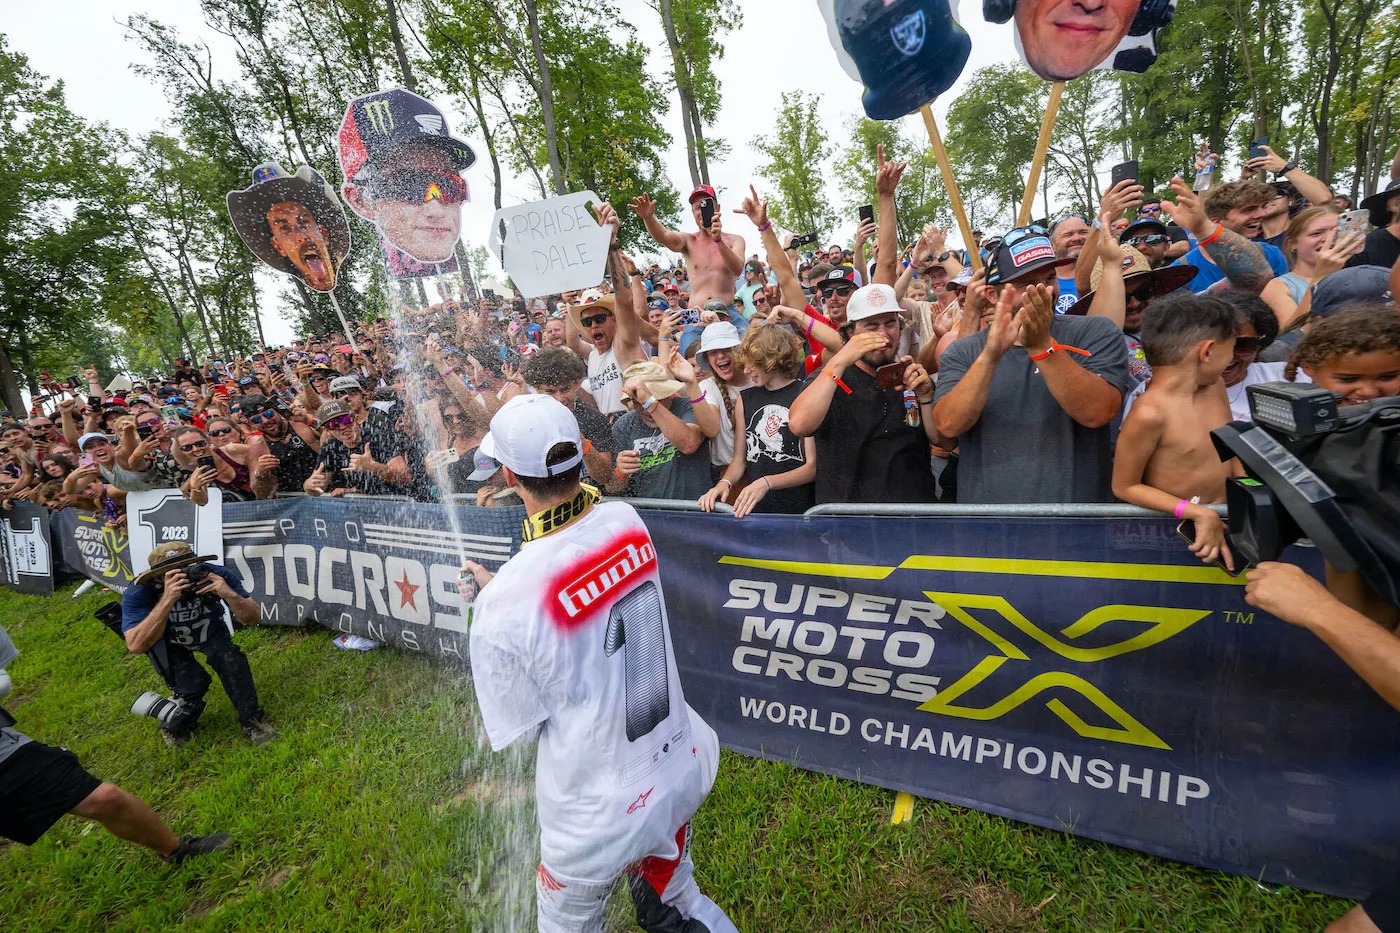 Rider sprays champagne on an MX crowd. Media provided by Pro MX.